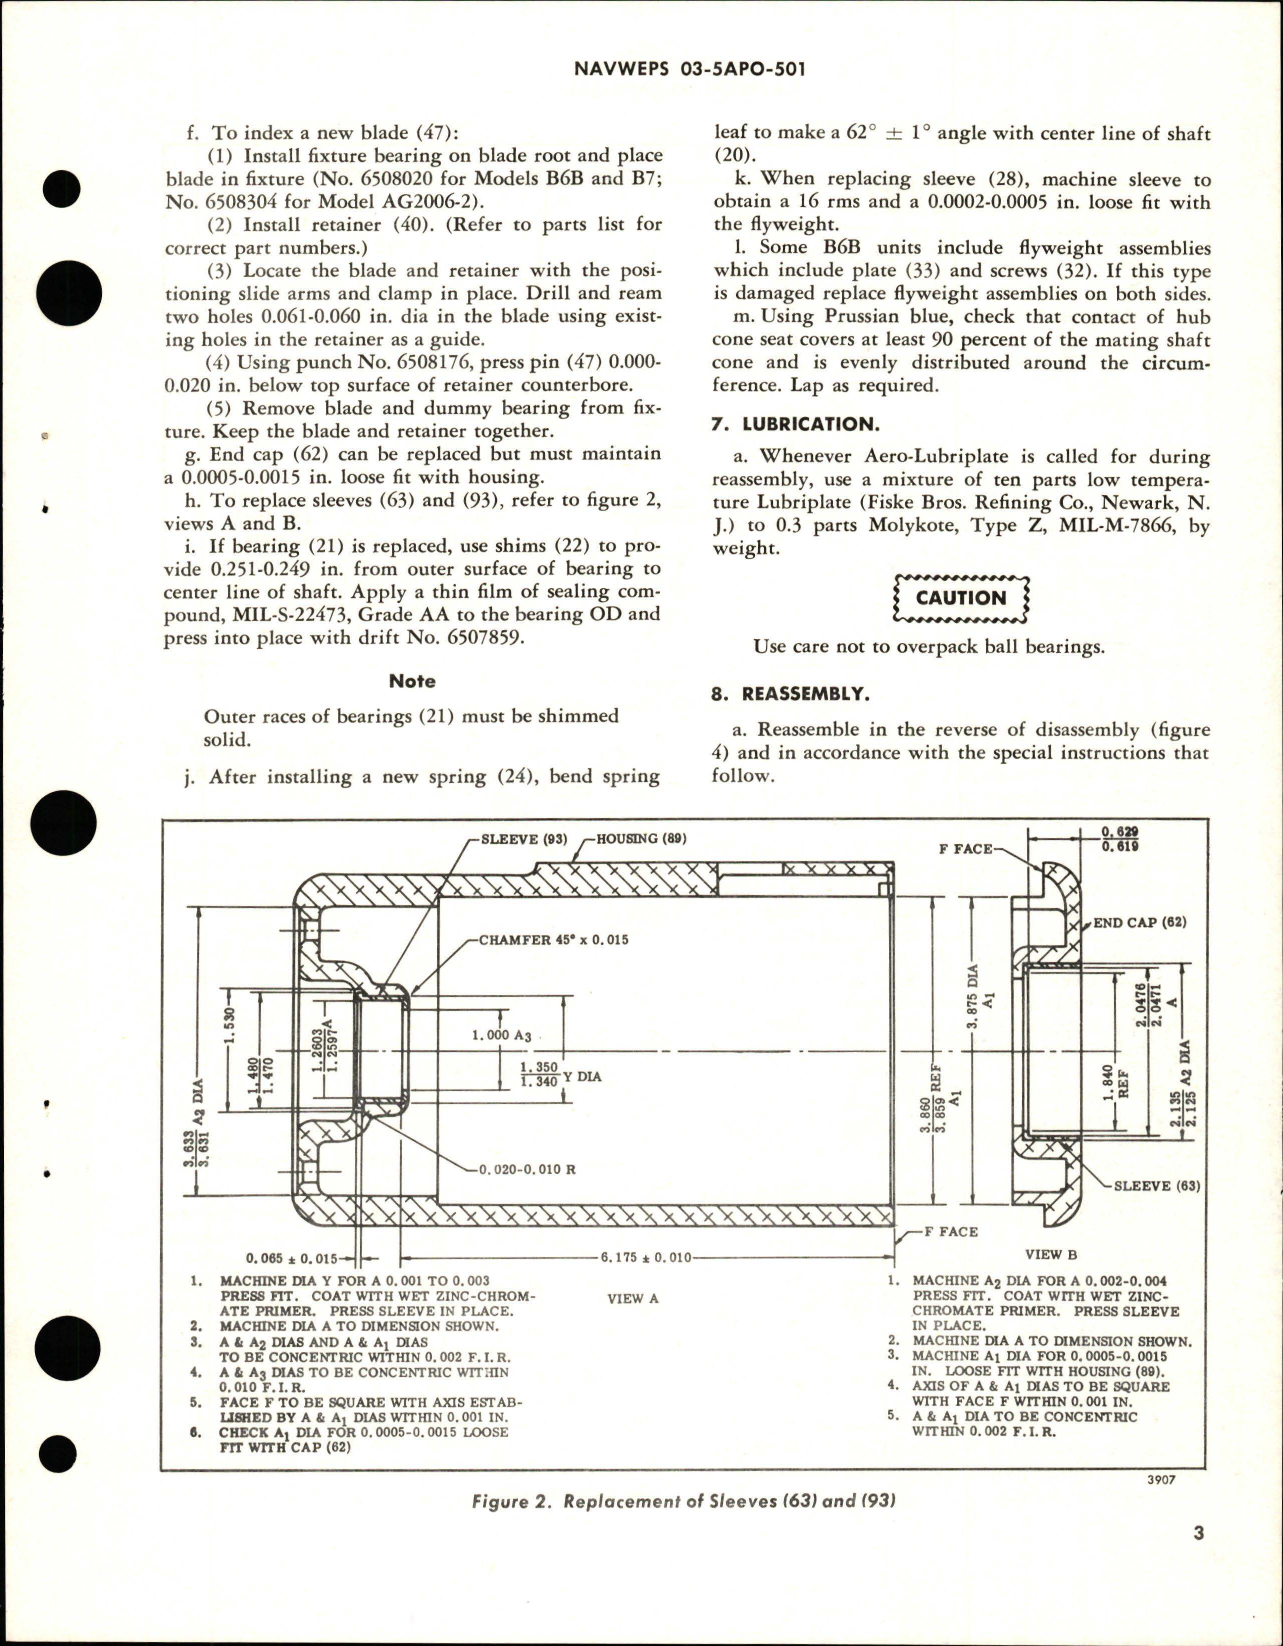 Sample page 5 from AirCorps Library document: Overhaul Instructions with Illustrated Parts Breakdown for Air Driven Generator Assembly - Parts 6509402, 6505115, and 6522875